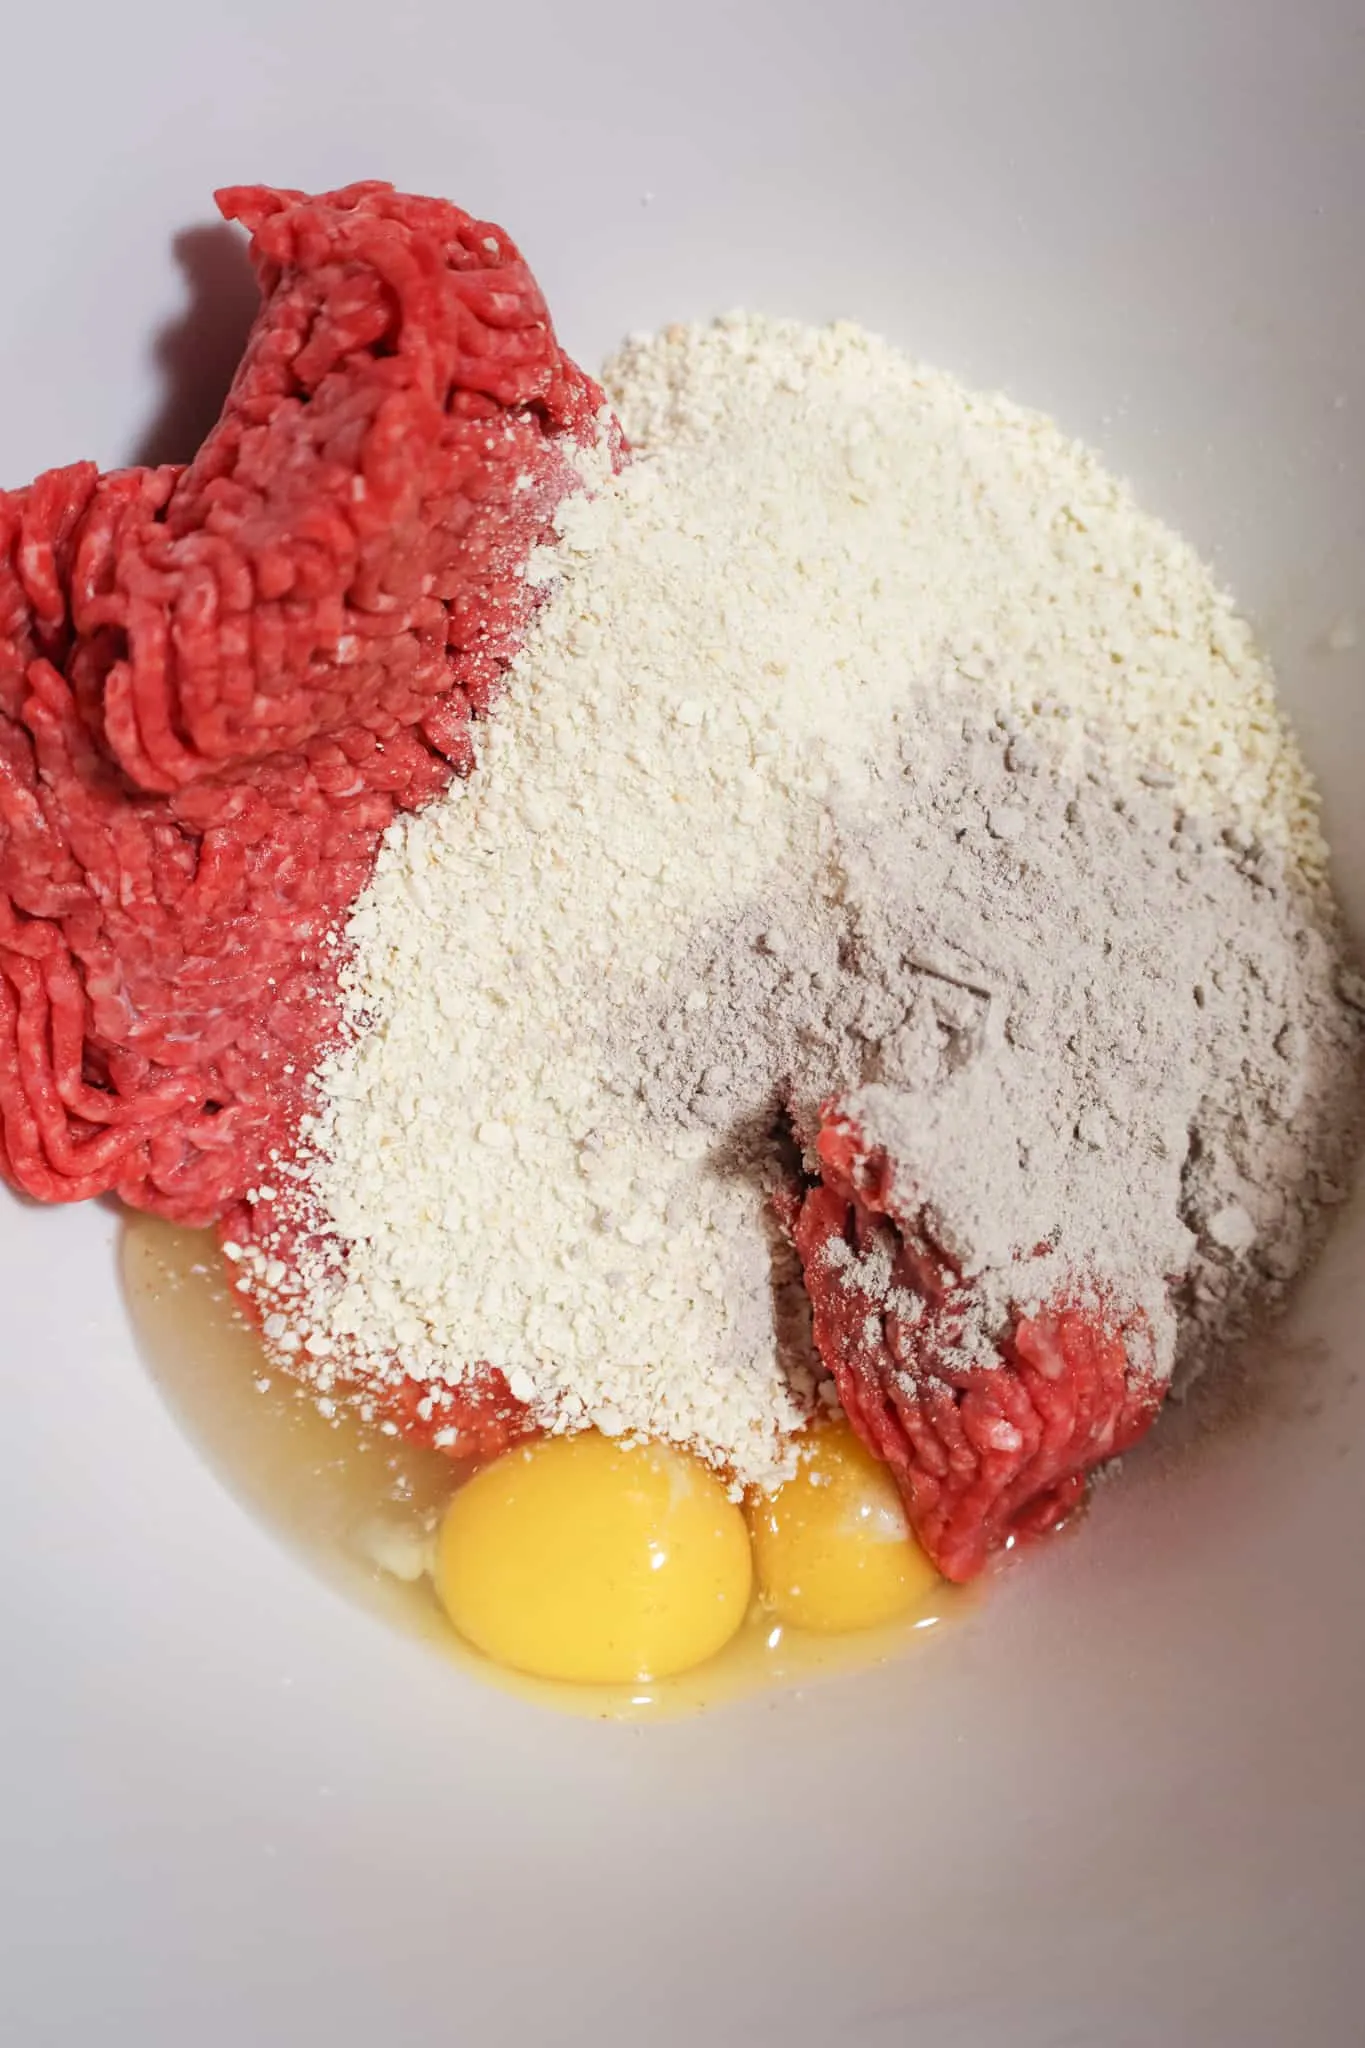 bread crumbs, gravy mix, eggs and ground beef in a mixing bowl